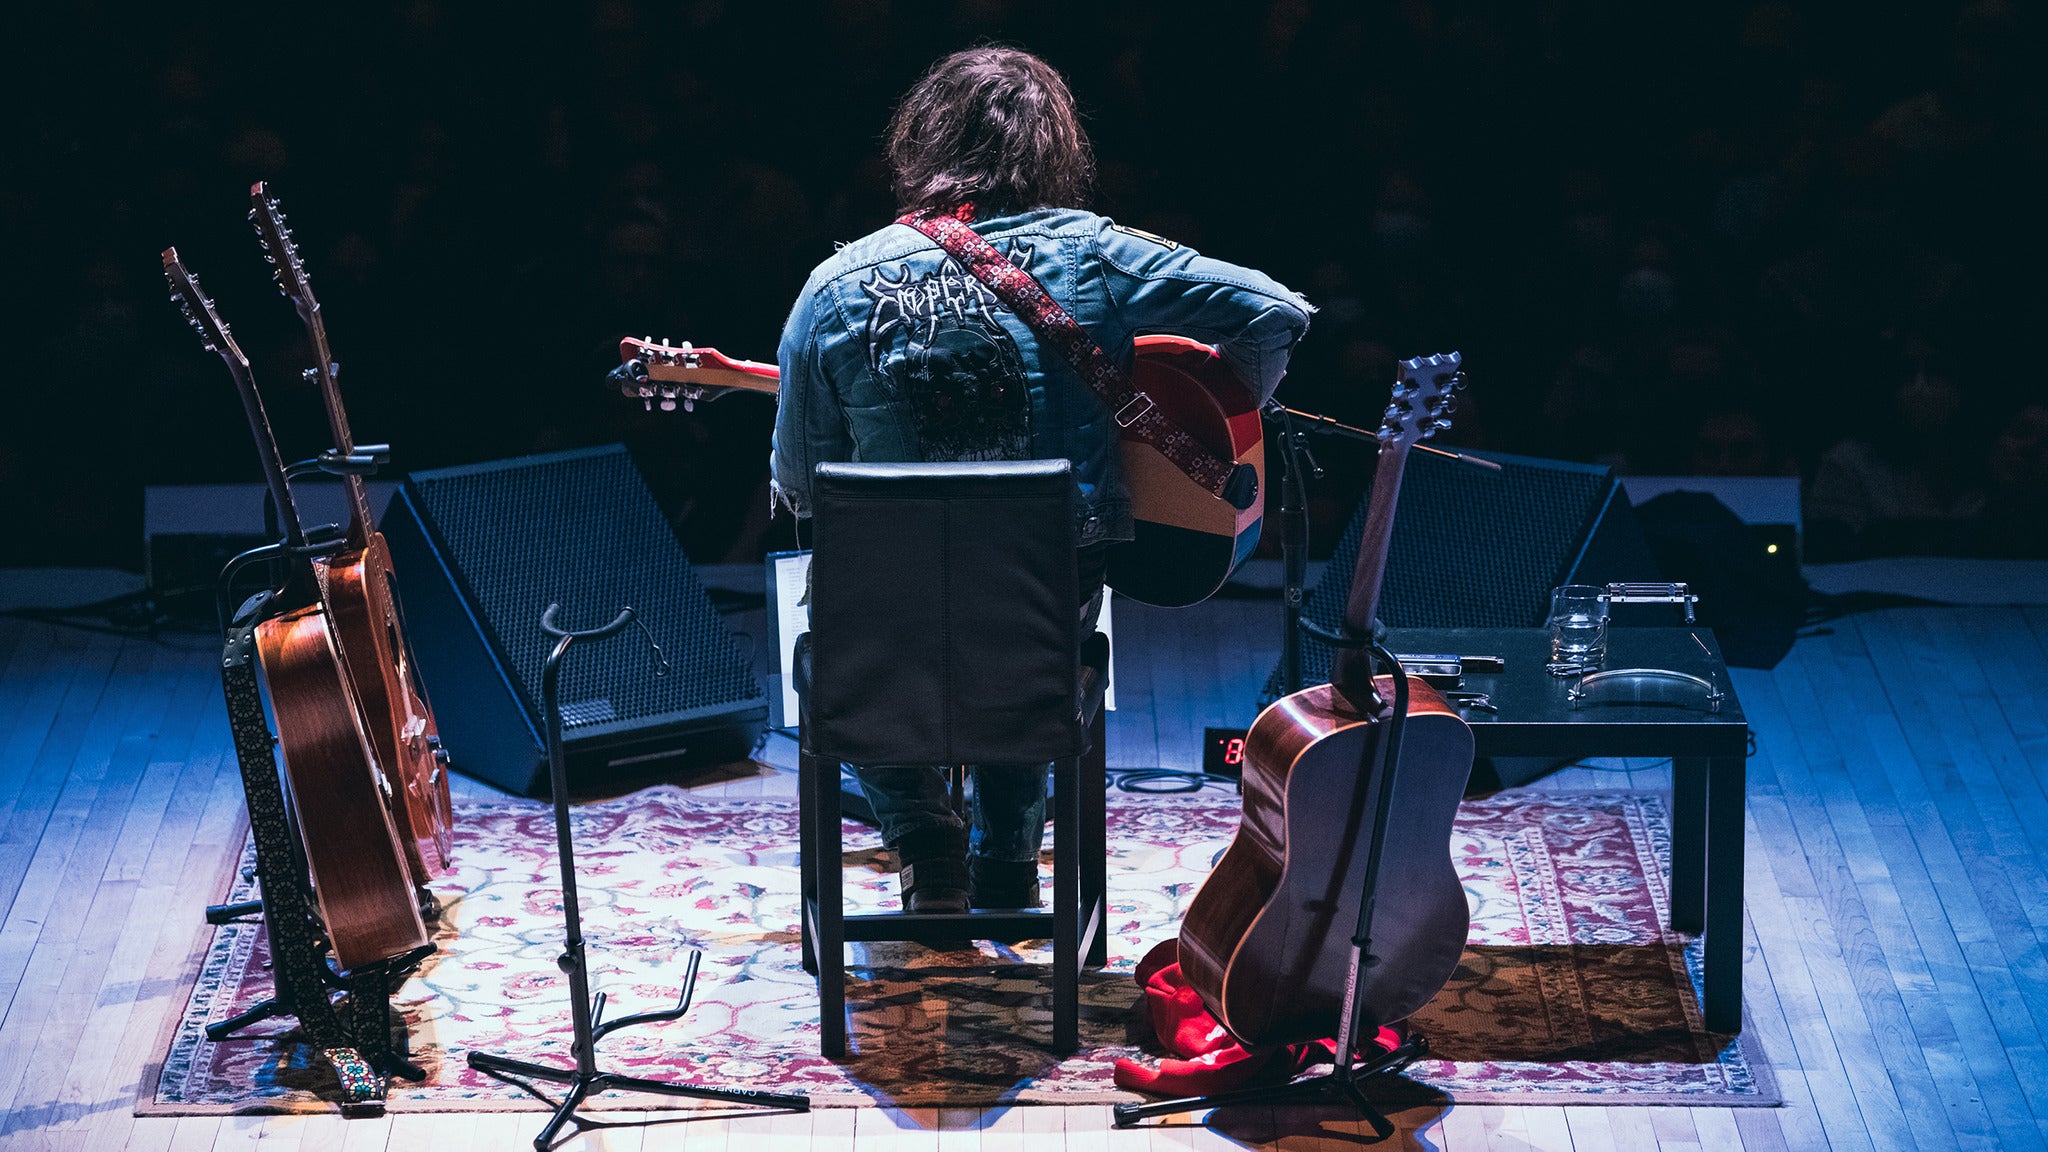 Ryan Adams & The Cardinals pre-sale code for advance tickets in Chattanooga